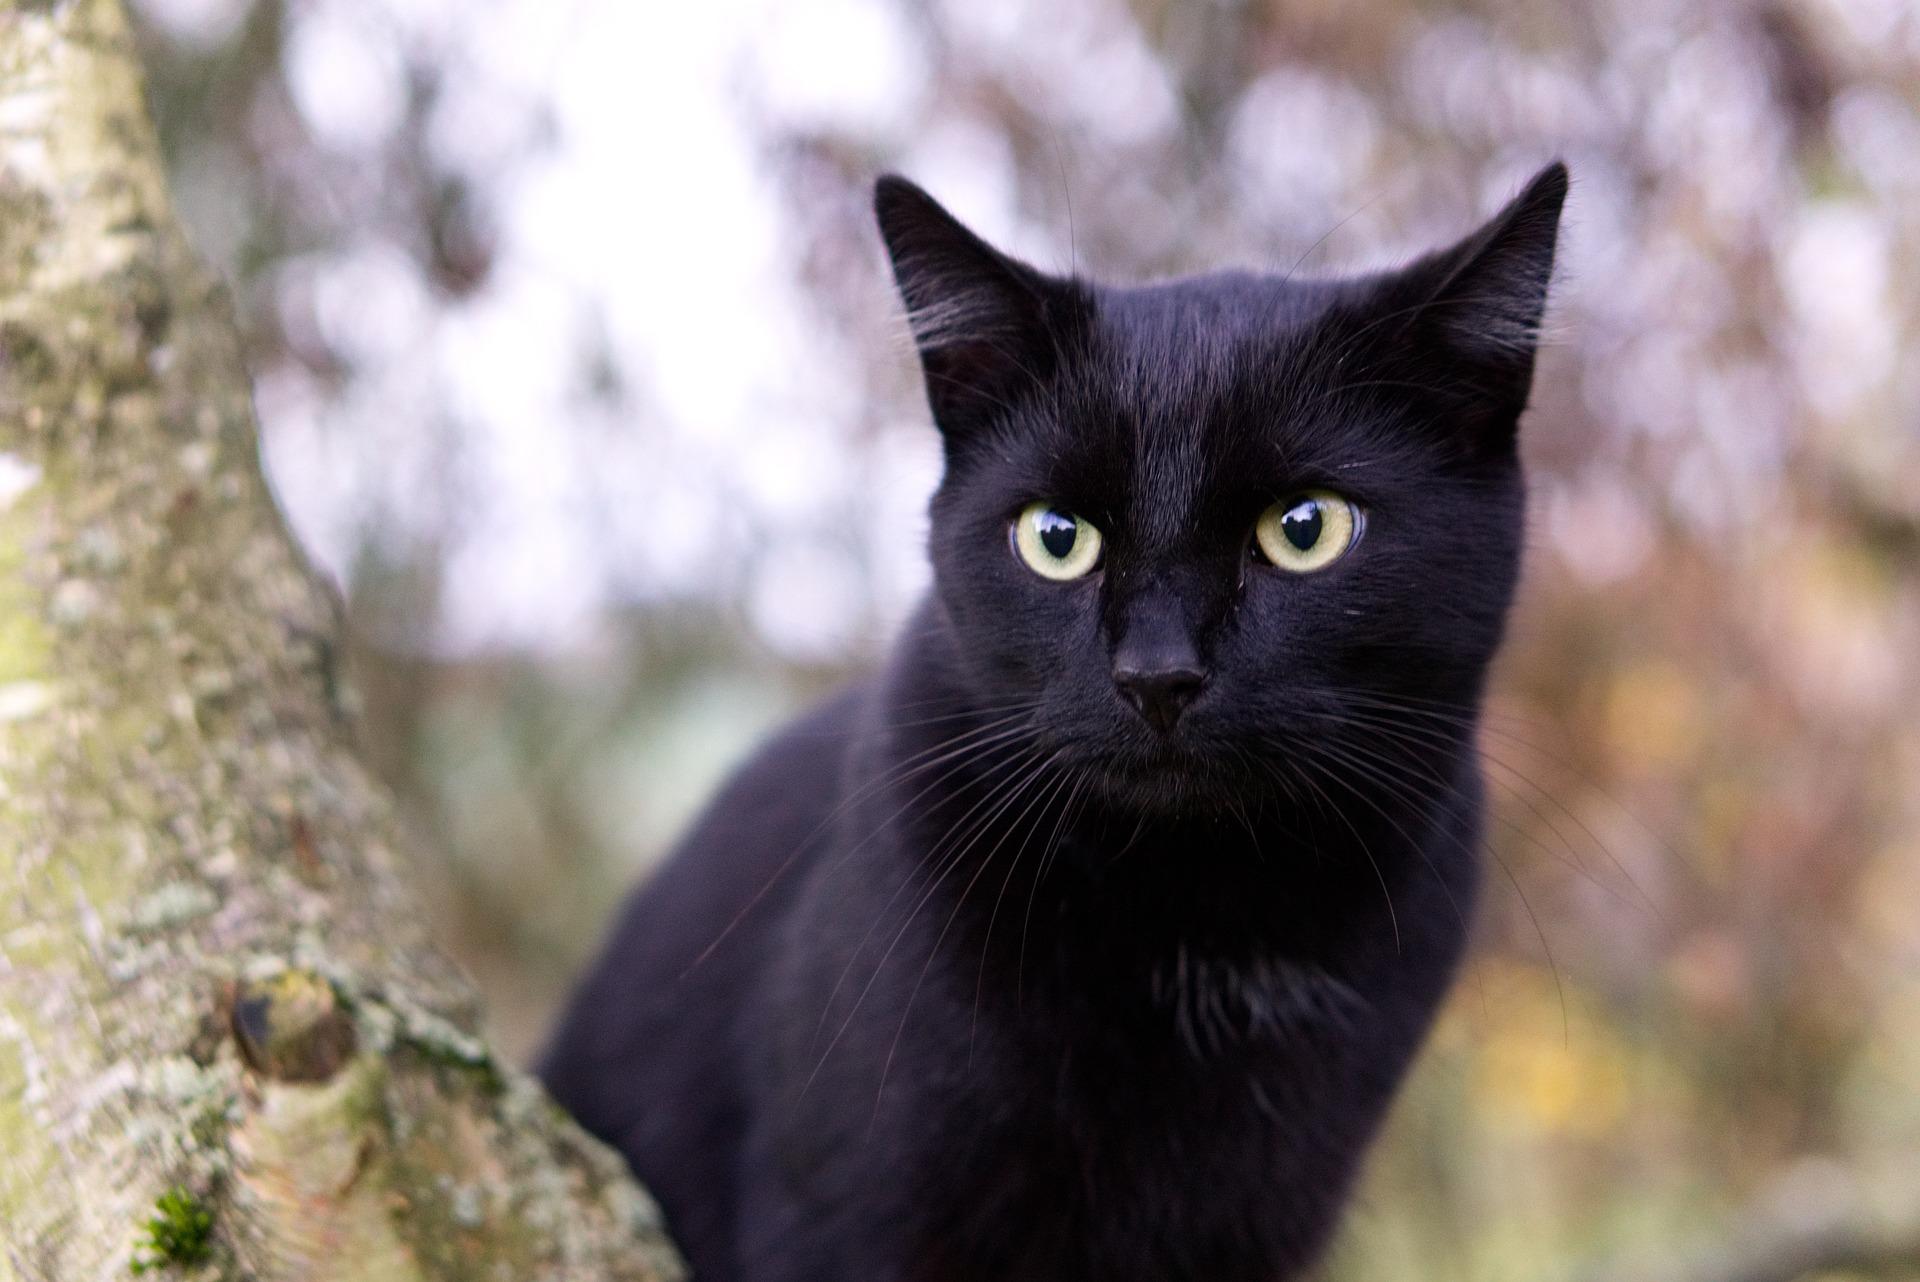 Black Cat: Spiritual Meaning, Dream Meaning, Symbolism & More -